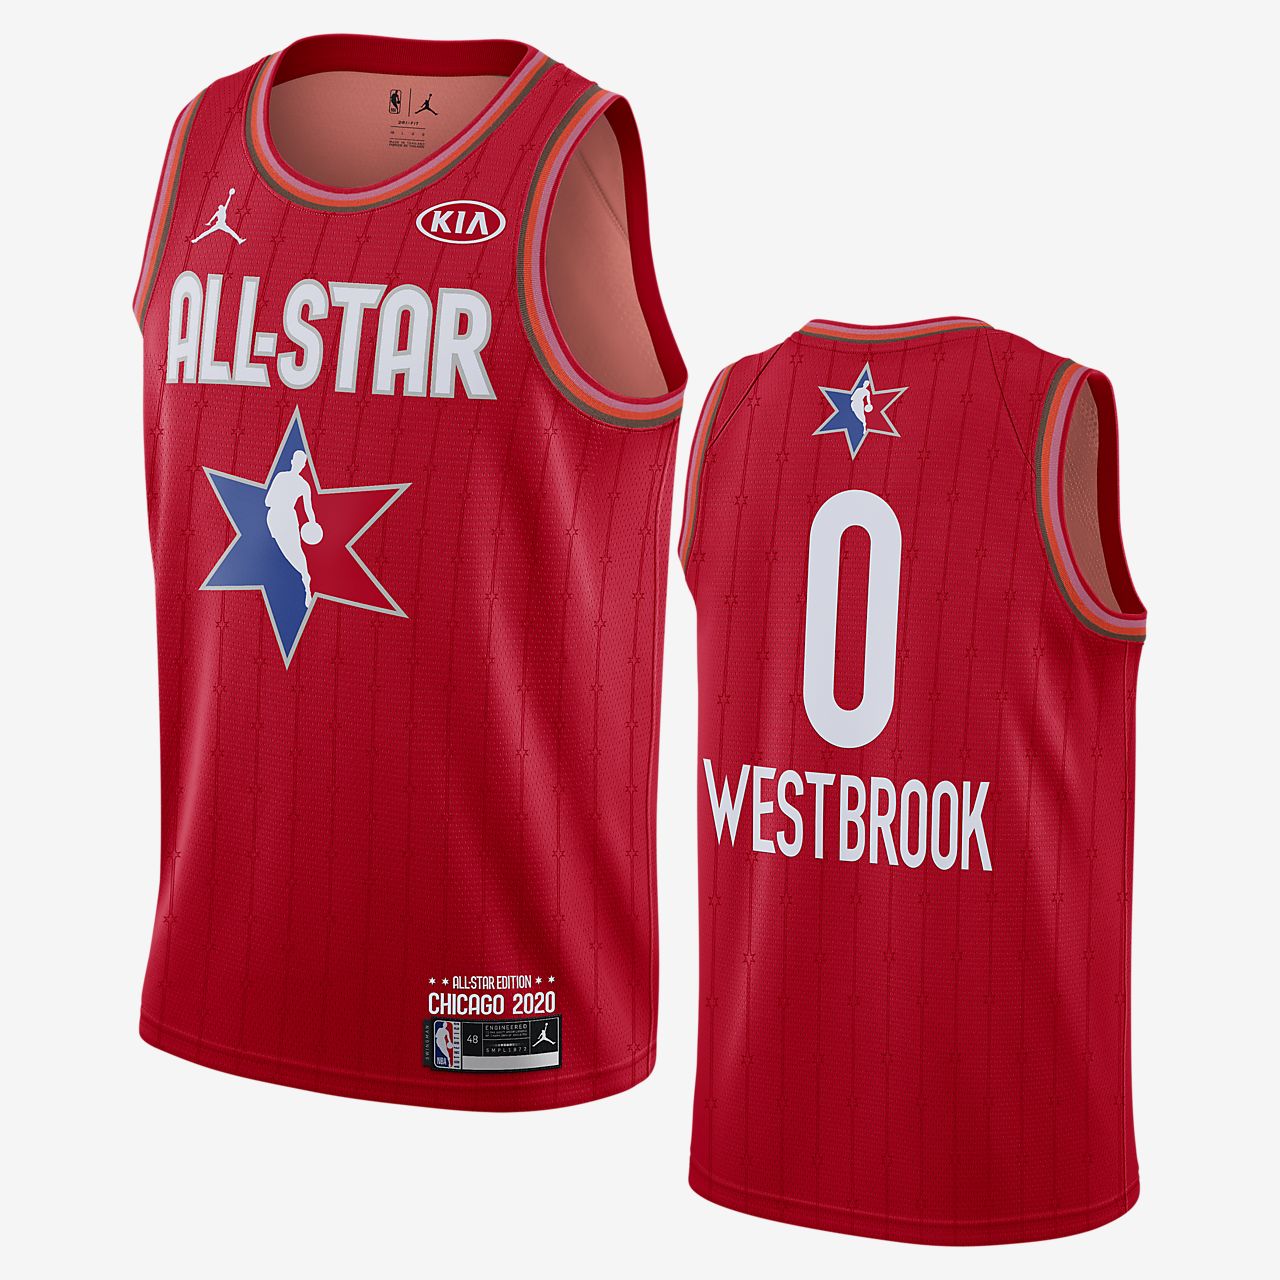 russell westbrook jersey canada